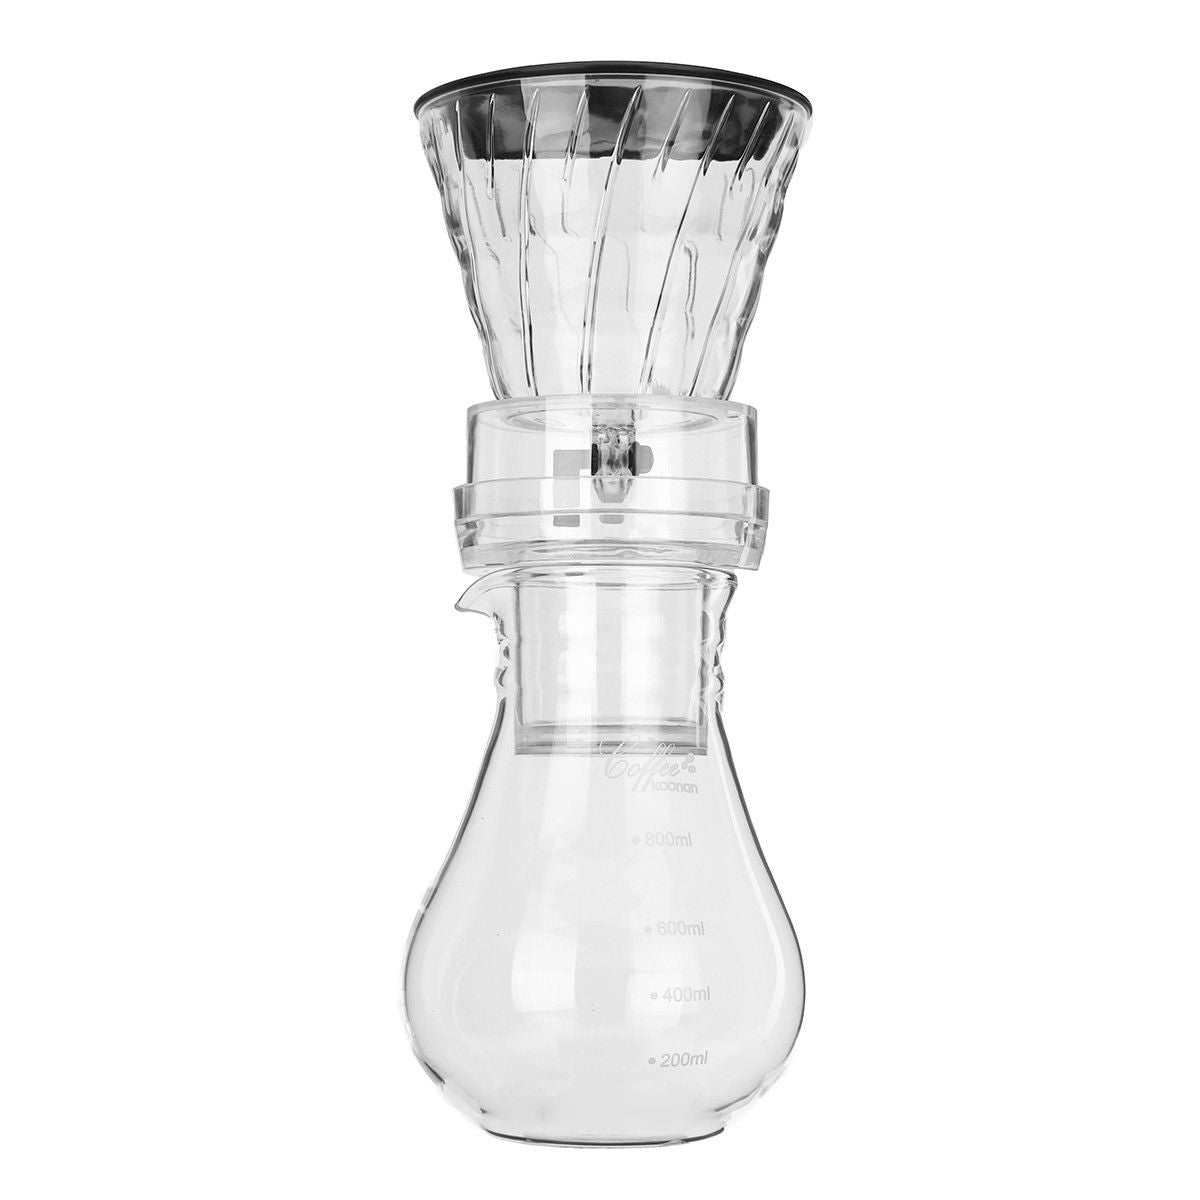 The Cold Iced Drip Brewer